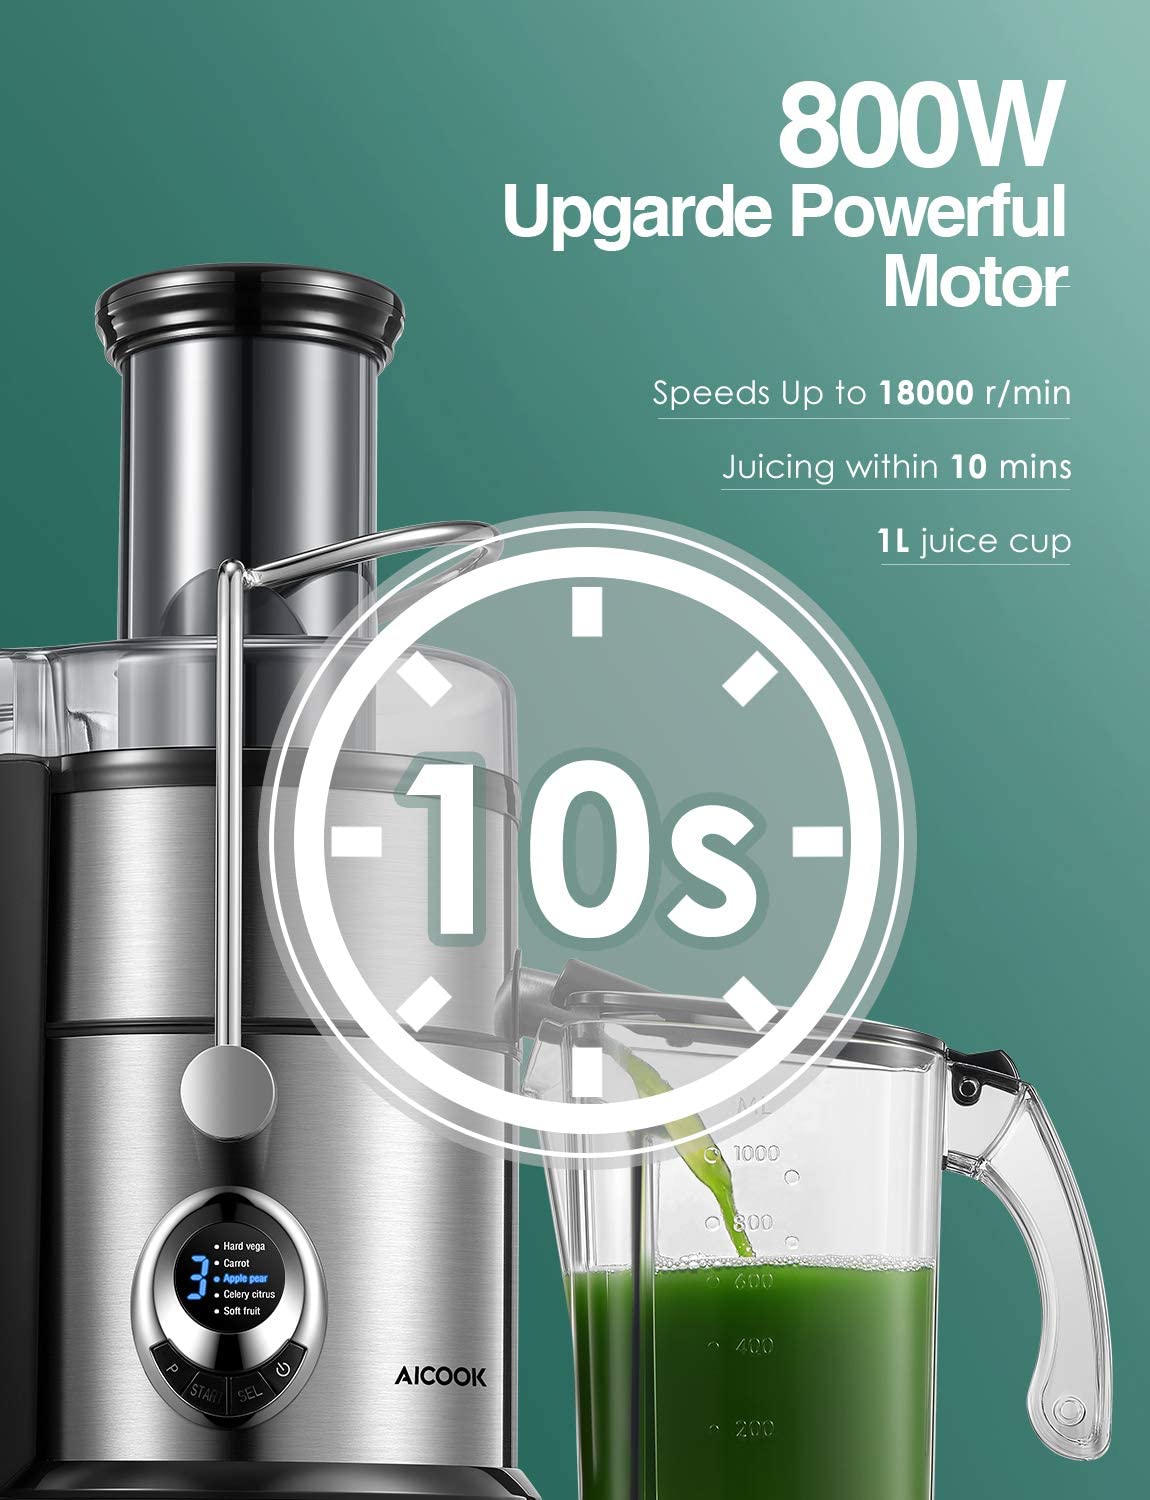 Centrifugal Juicer Machine with LCD Monitor